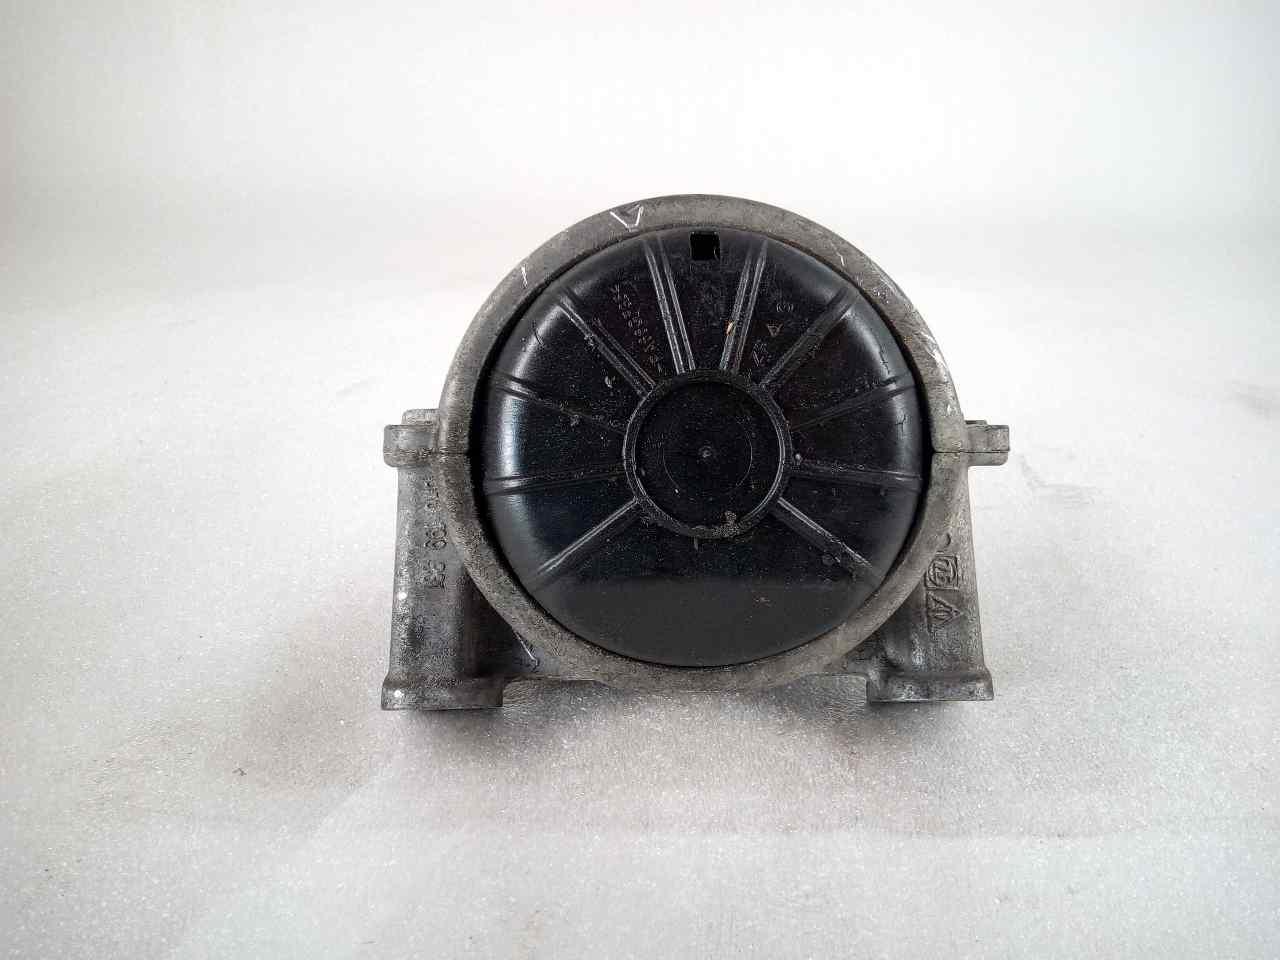 AUDI A6 C6/4F (2004-2011) Other Engine Compartment Parts 8R0199381 20070971